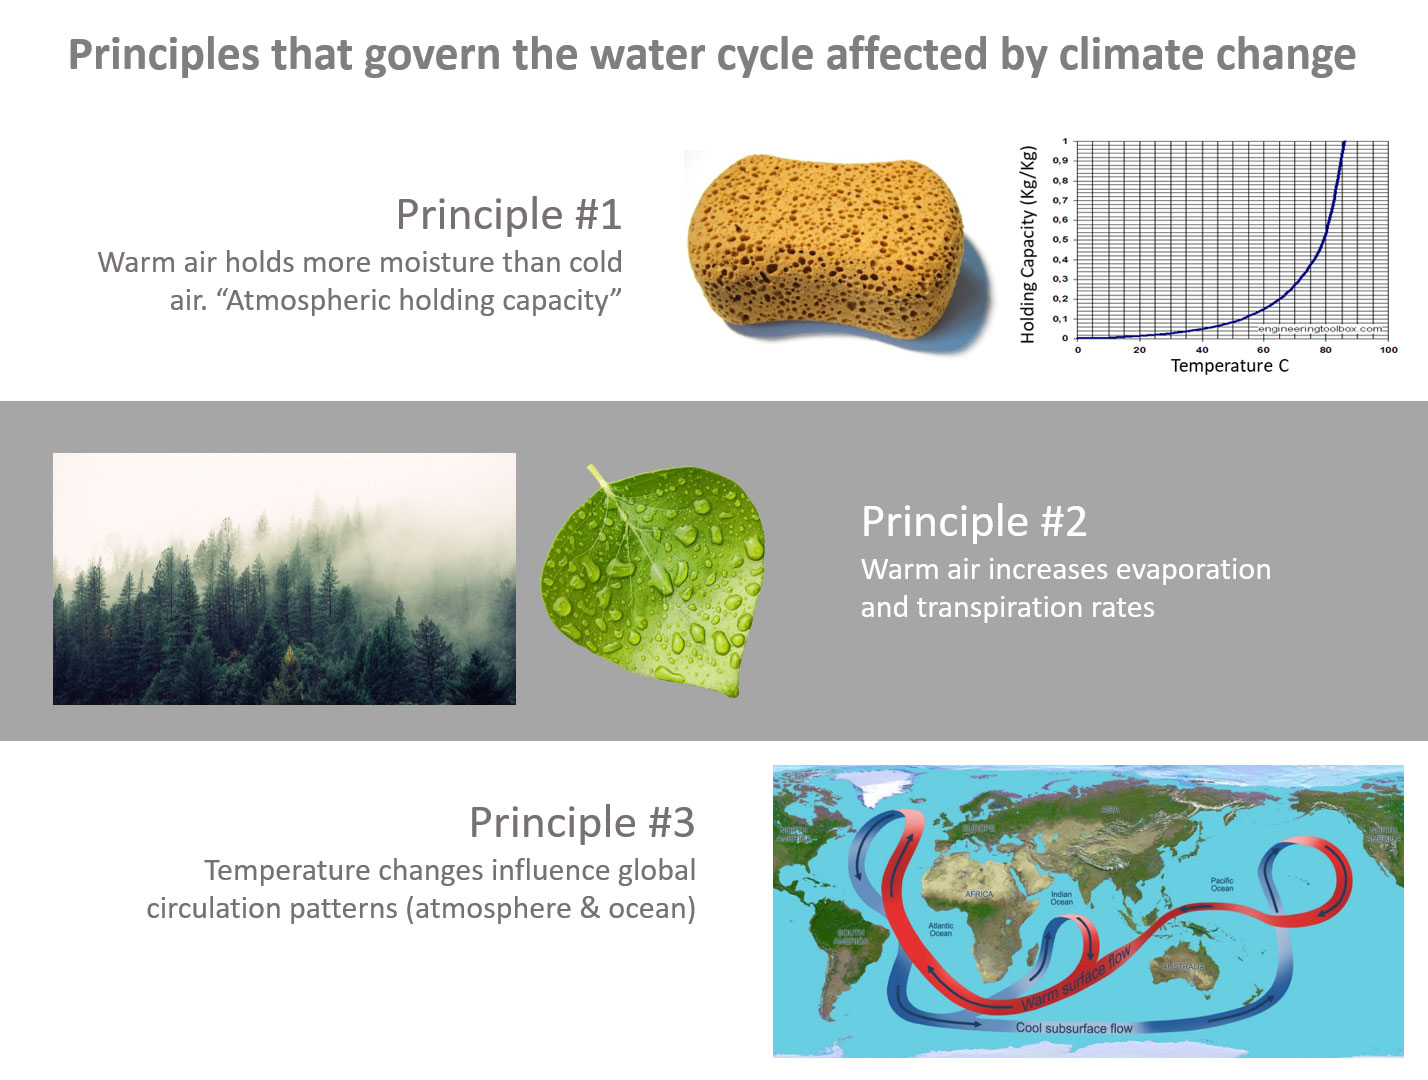 Graphic explains principles that govern the water cycle affected by climate change. Principle 1: Warm air holds more moisture than cold air. Principle 2: Warm air increases evaporation and transpiration rates. Principle 3: Temperature changes influence global circulation patterns (atmosphere and ocean).